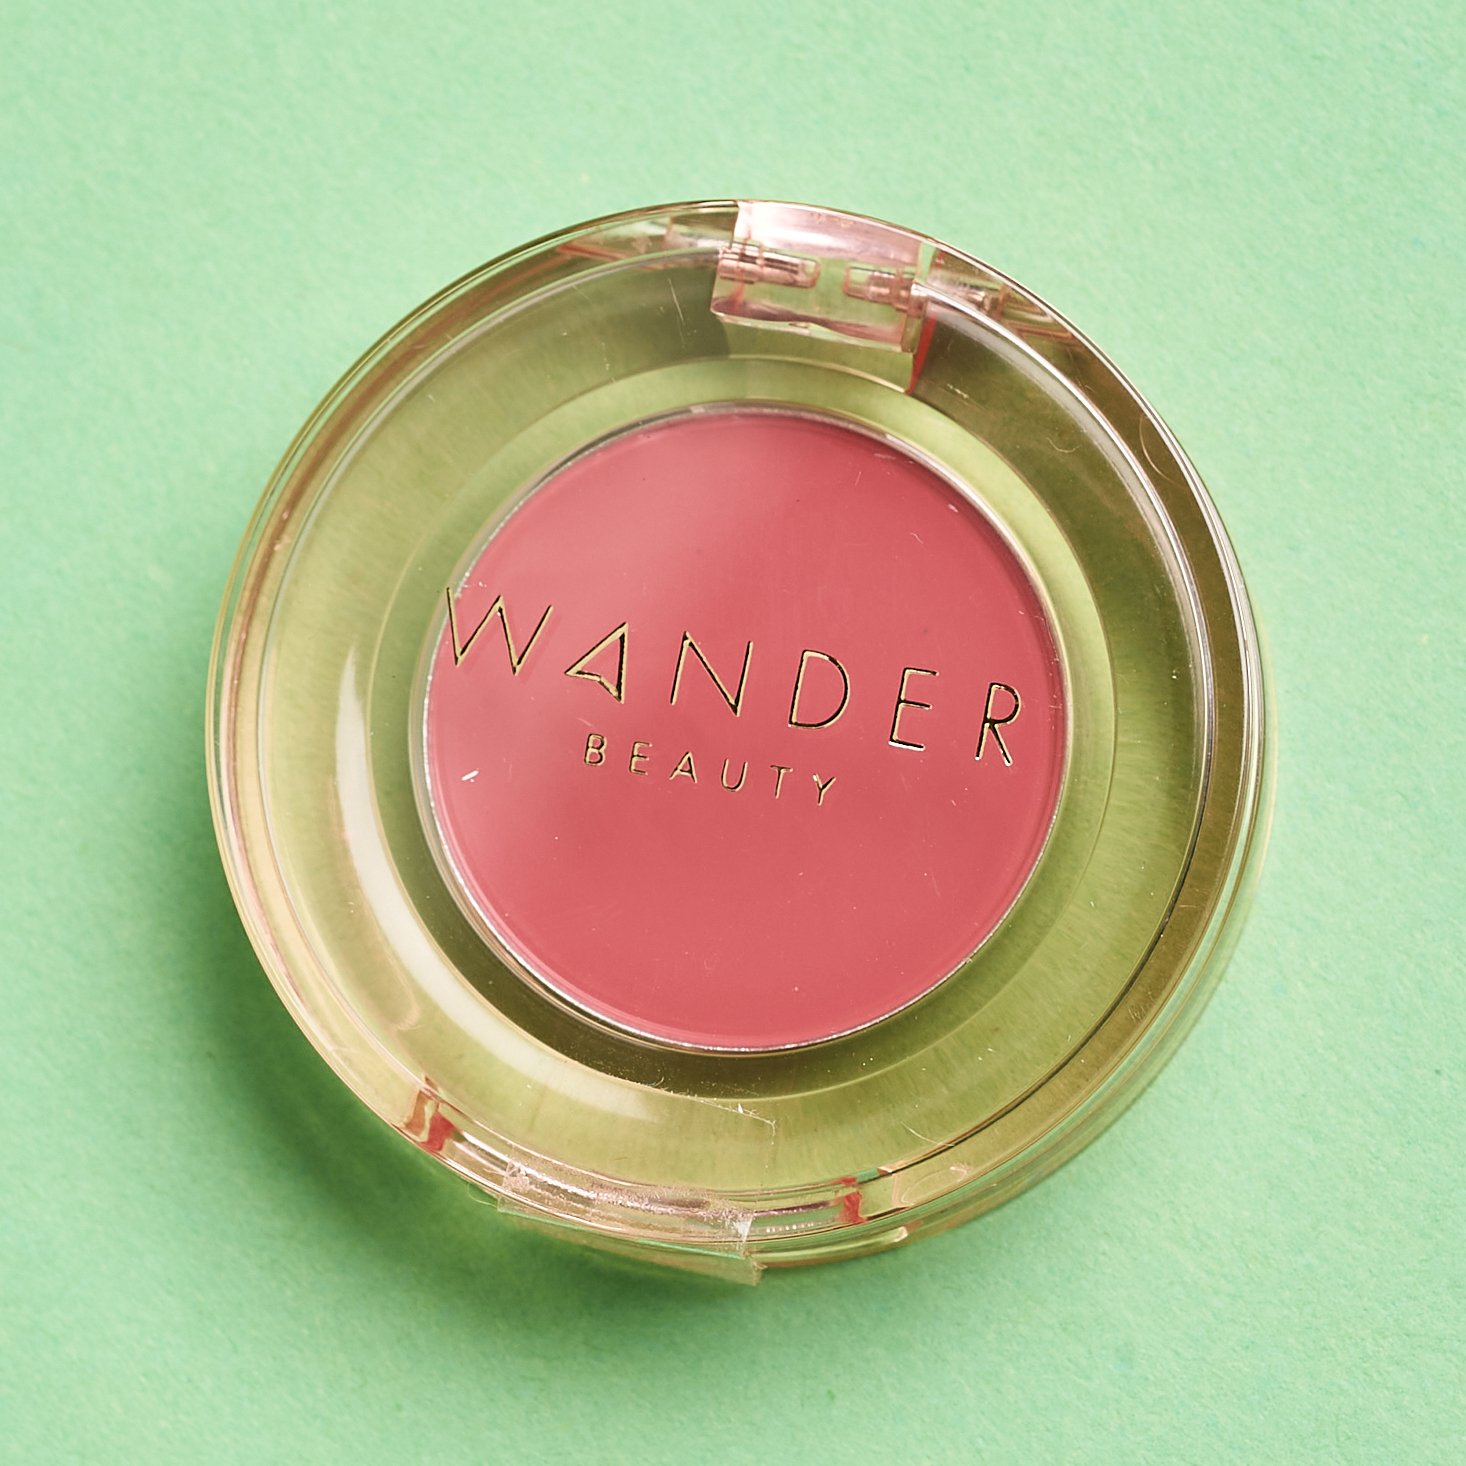 Wander Beauty Double Date Lip & Cheek Tint in Rendezvous closed